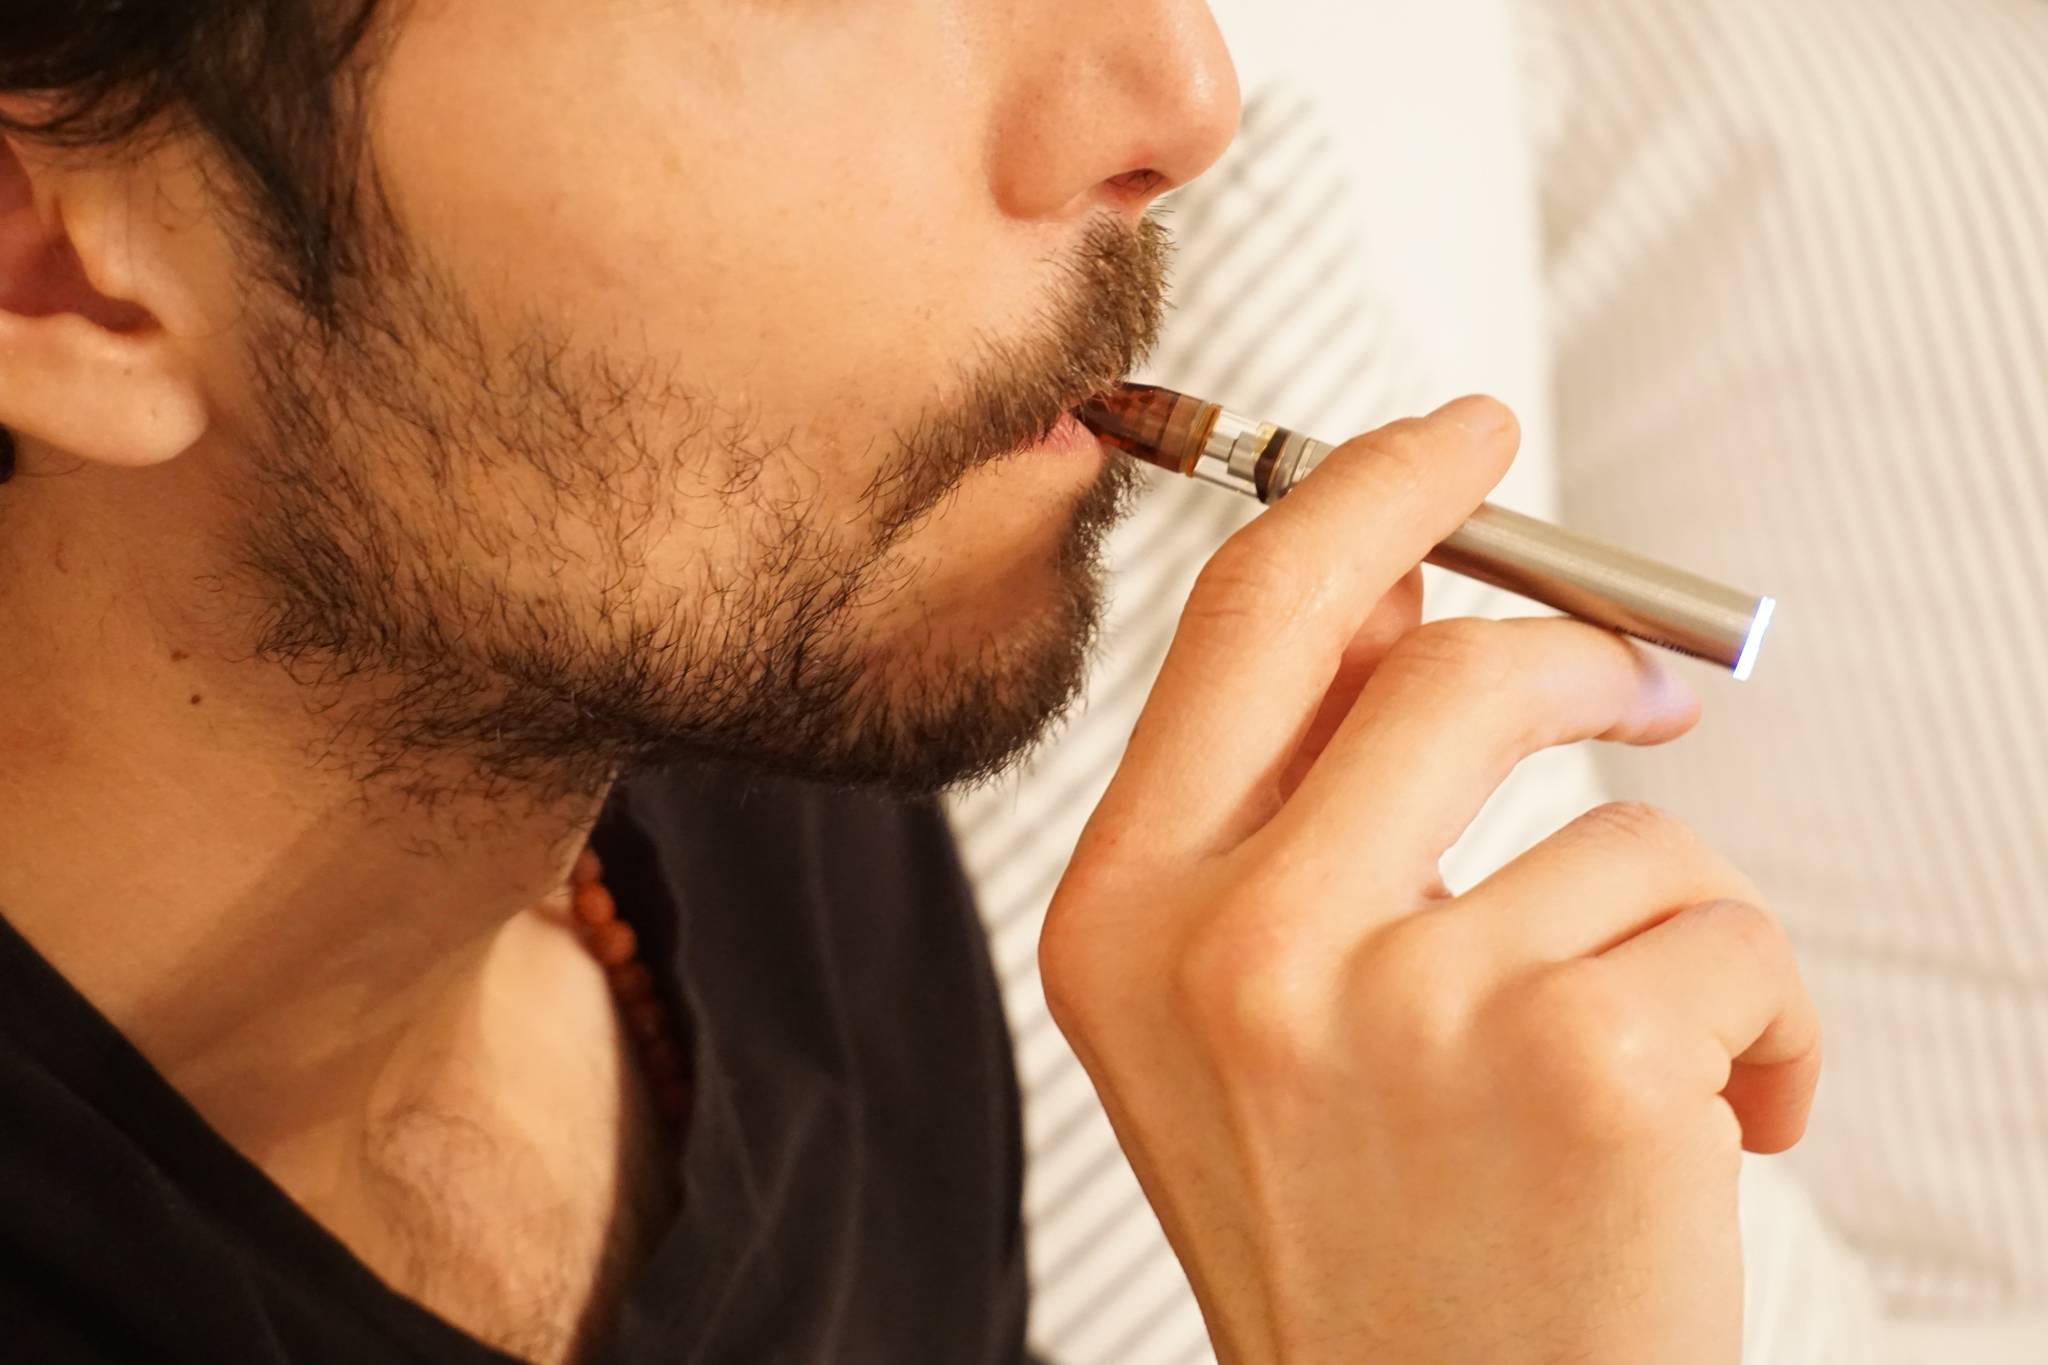 'Wellness' vapes gain traction among young adults